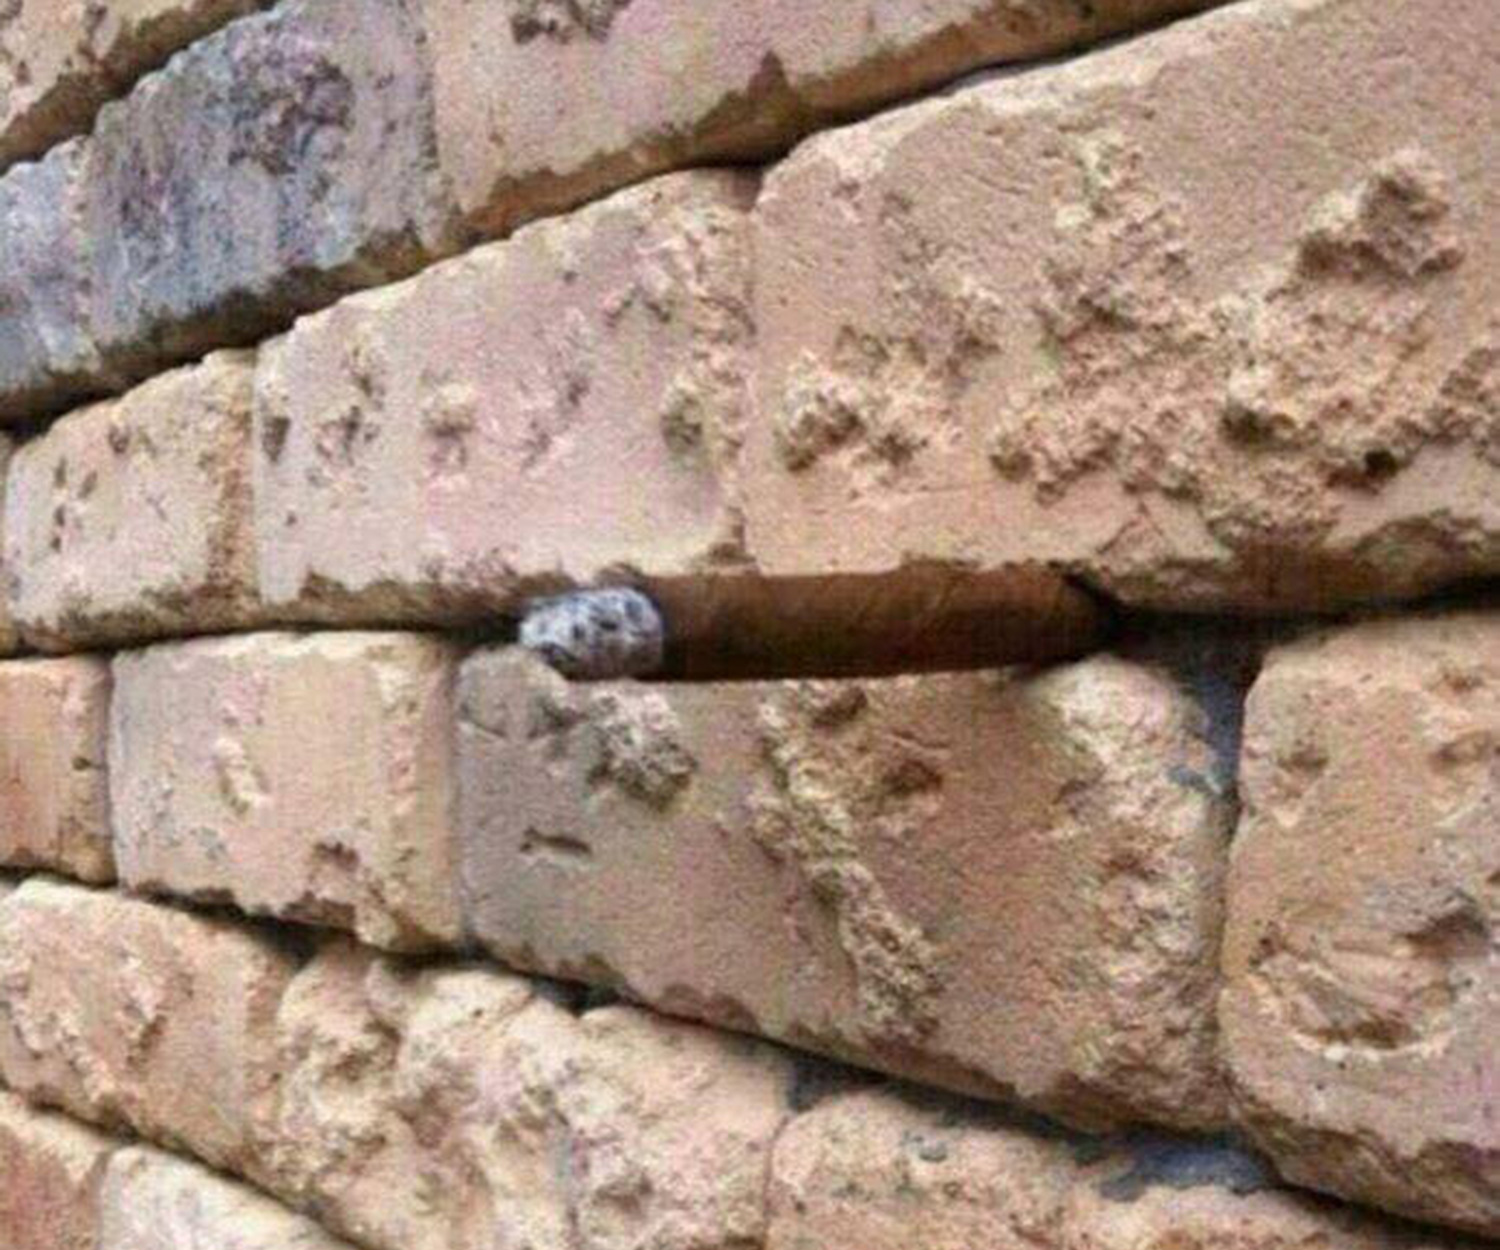 Can you see why people are so confused by this brick wall?